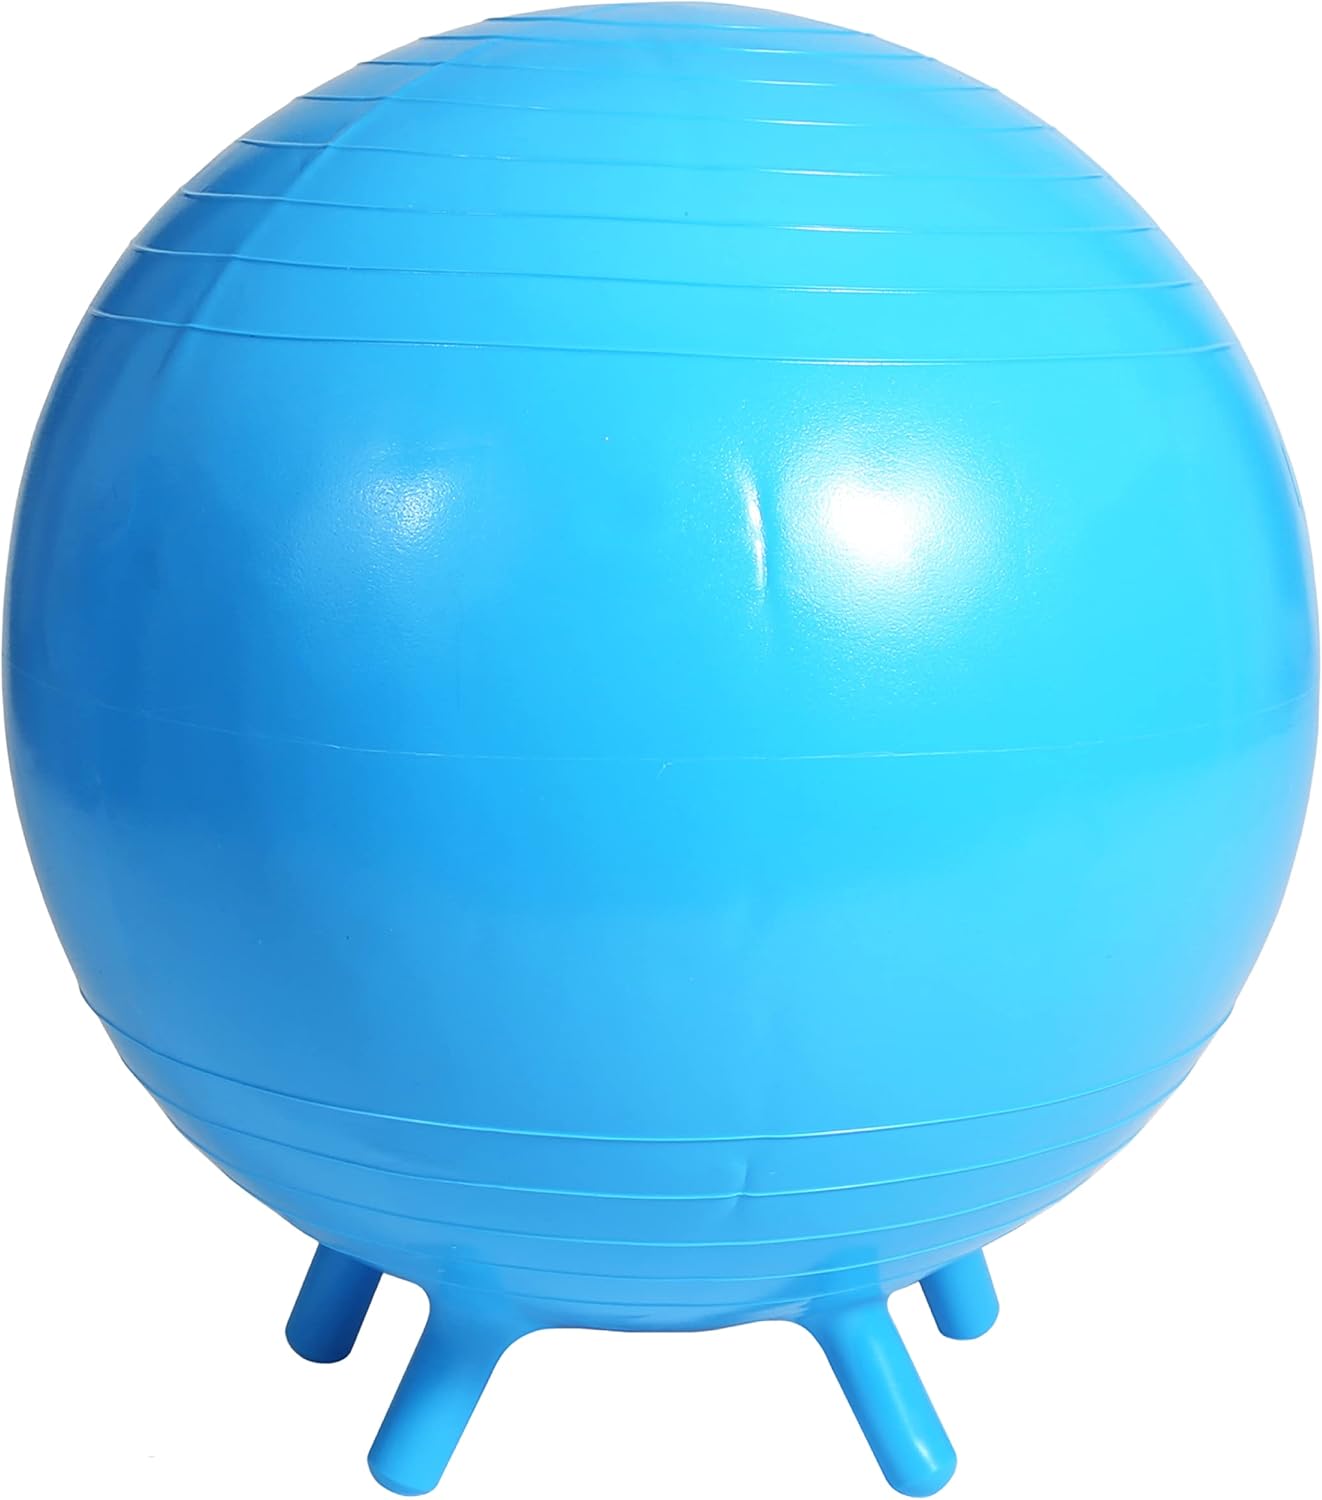 Fun & Function - Chair Ball - Yoga Ball Chair for Kids - Flexible Seating for Classroom, Elementary & Middle School - Wiggle Chair for Kids - Blue - 21